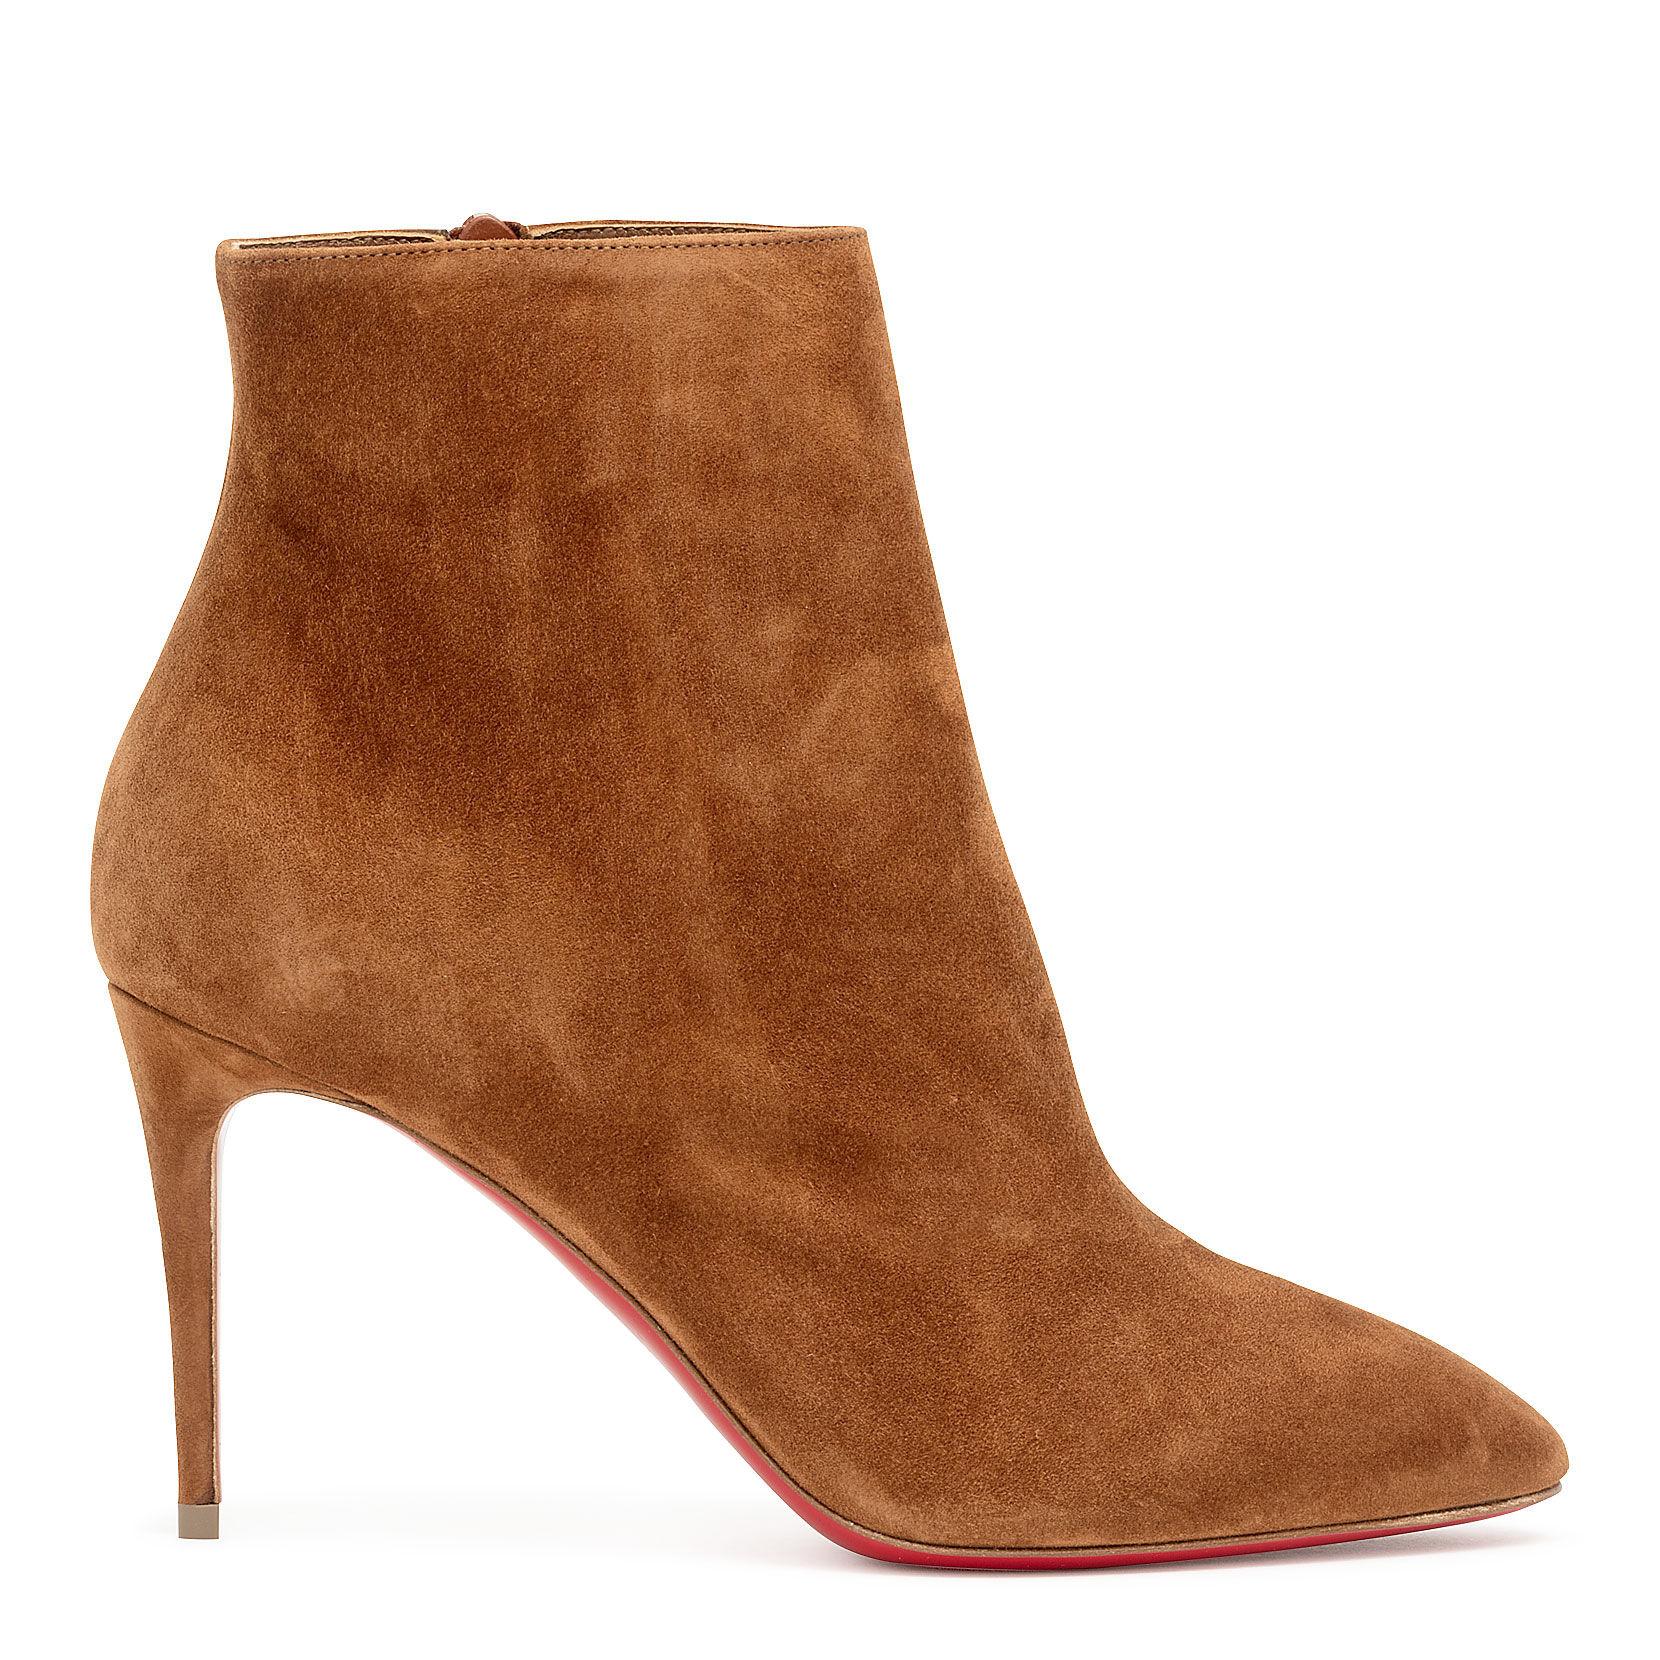 Christian Louboutin Eloise Booty 85 Tan Suede Ankle Boots in Brown - Lyst